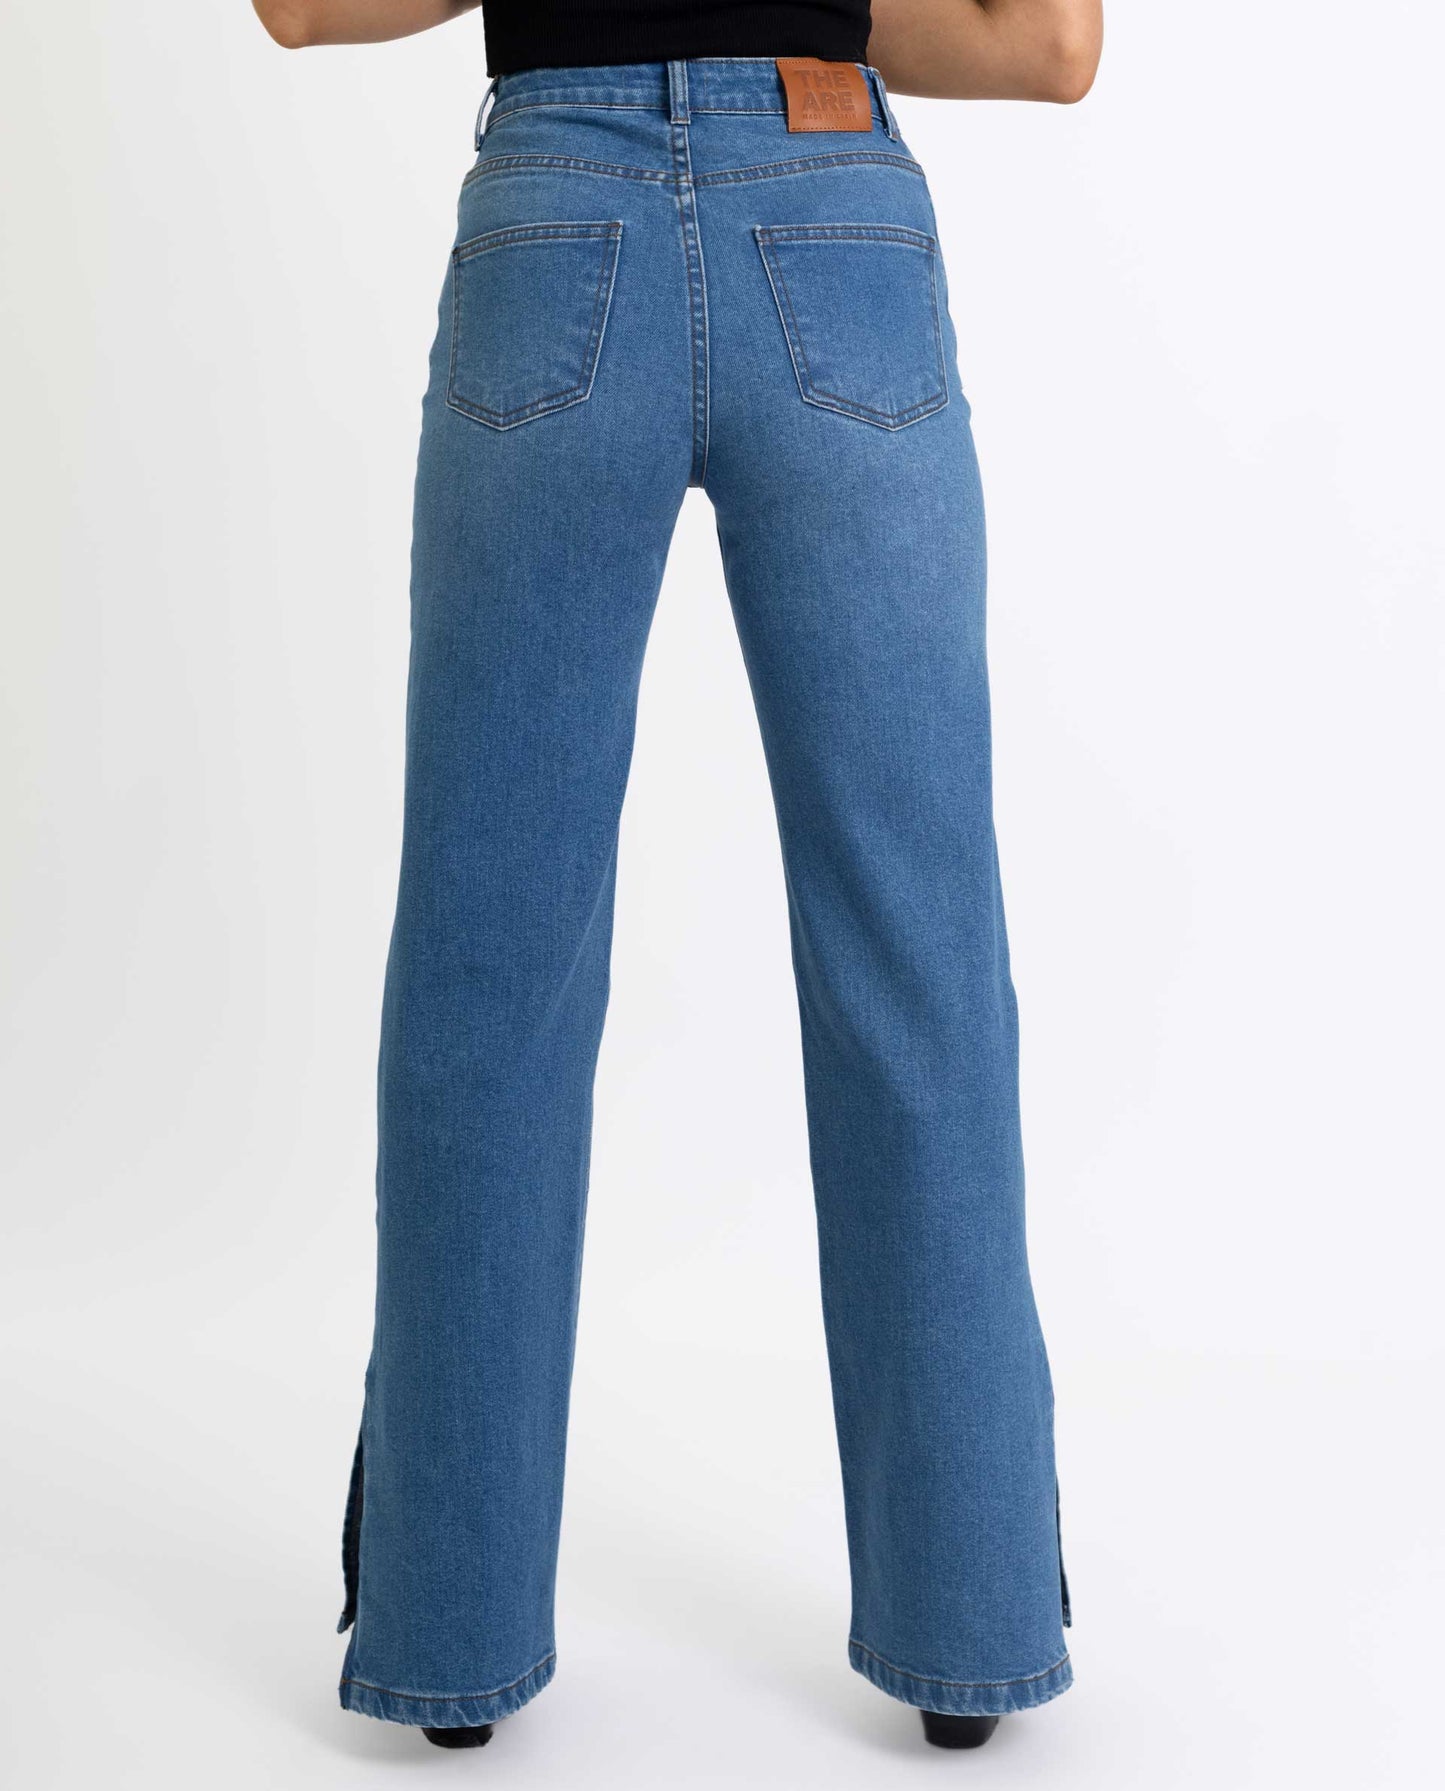 JEANS BORN TO BE | Jeans con Aberturas Laterales para Mujer | Colección Casual THE-ARE